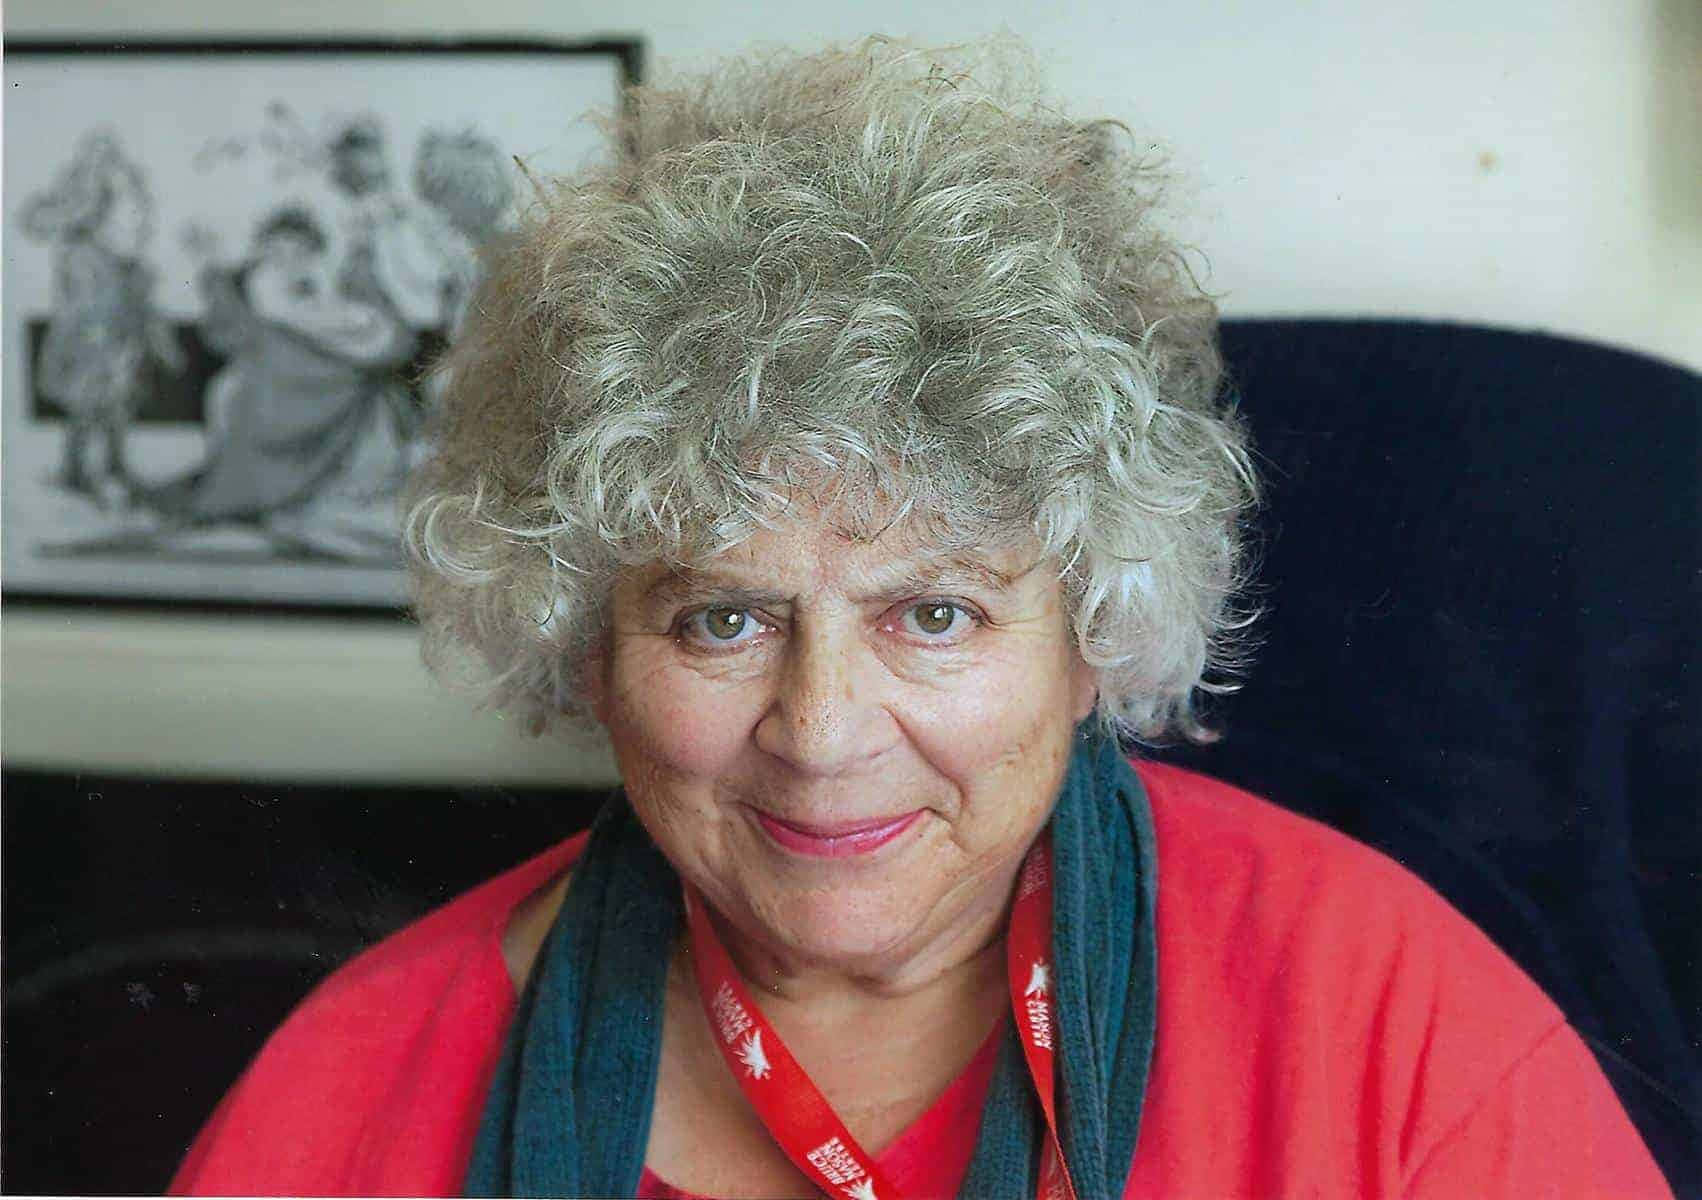 Miriam Margolyes Giving A Radiant Smile In An Authentic Portrait Shot Wallpaper